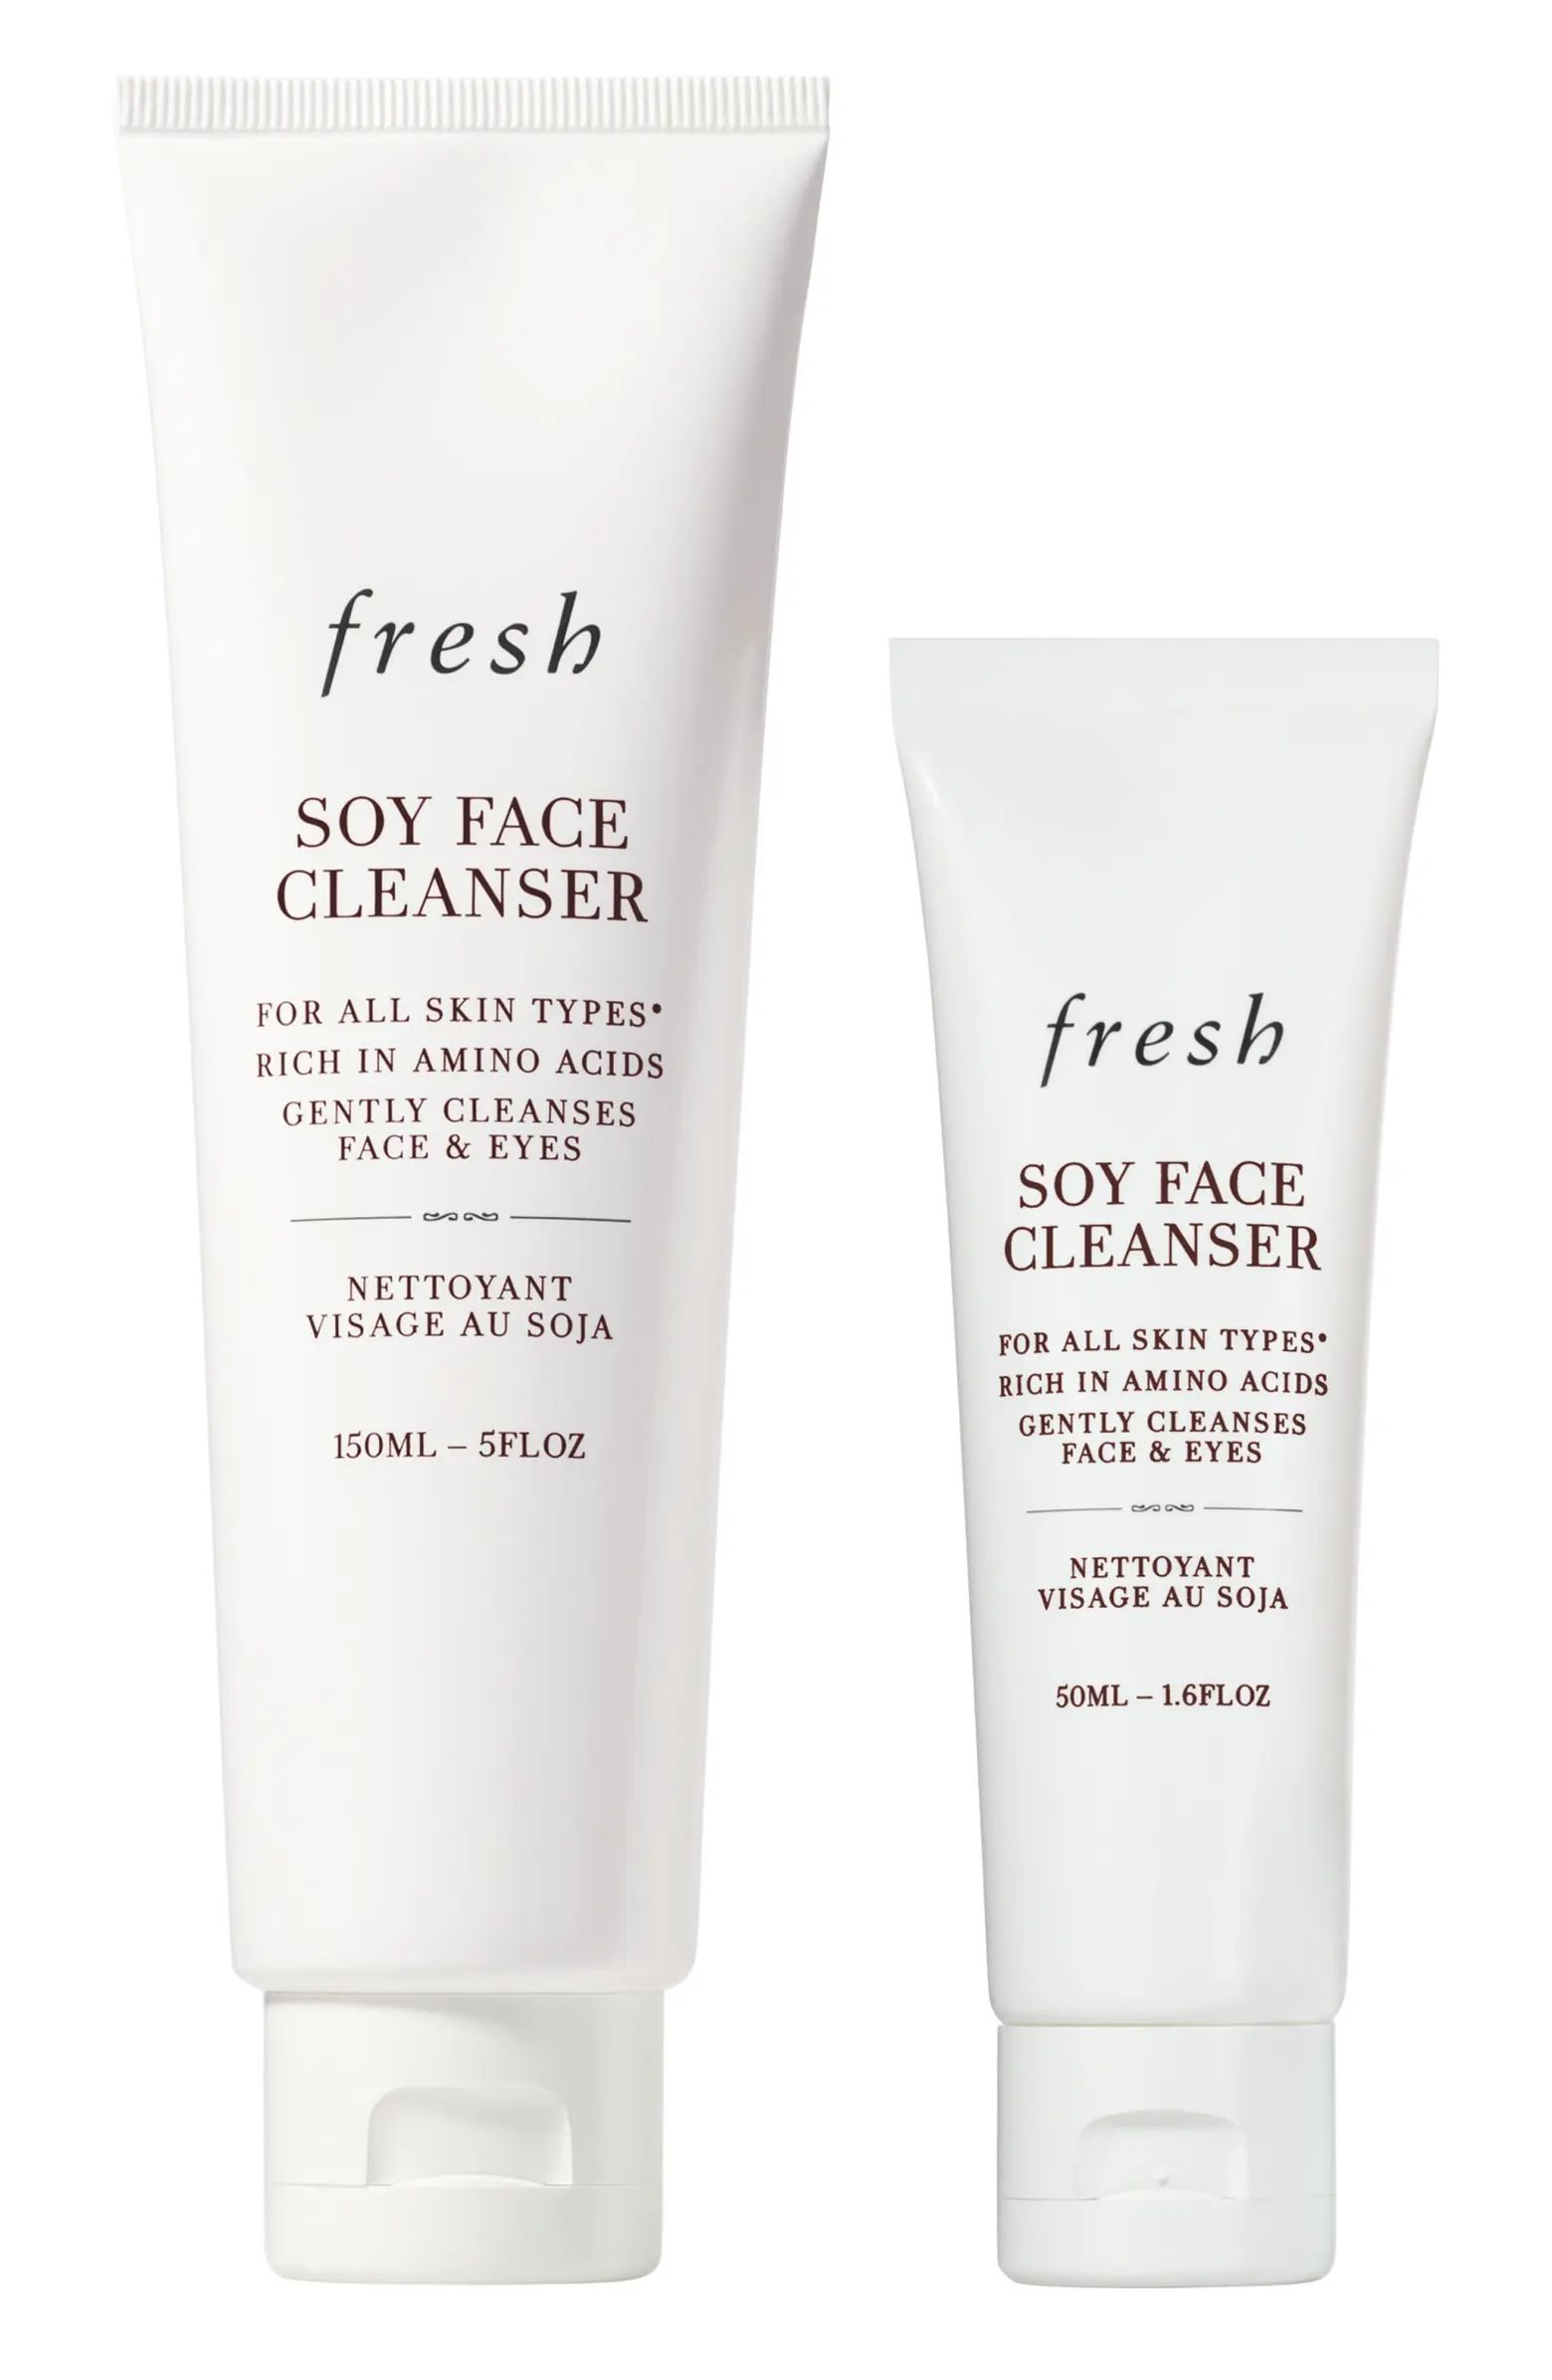 Fresh® Cleanse Around the Clock Soy Face Cleanser Duo Set $54 Value | Nordstrom | Nordstrom